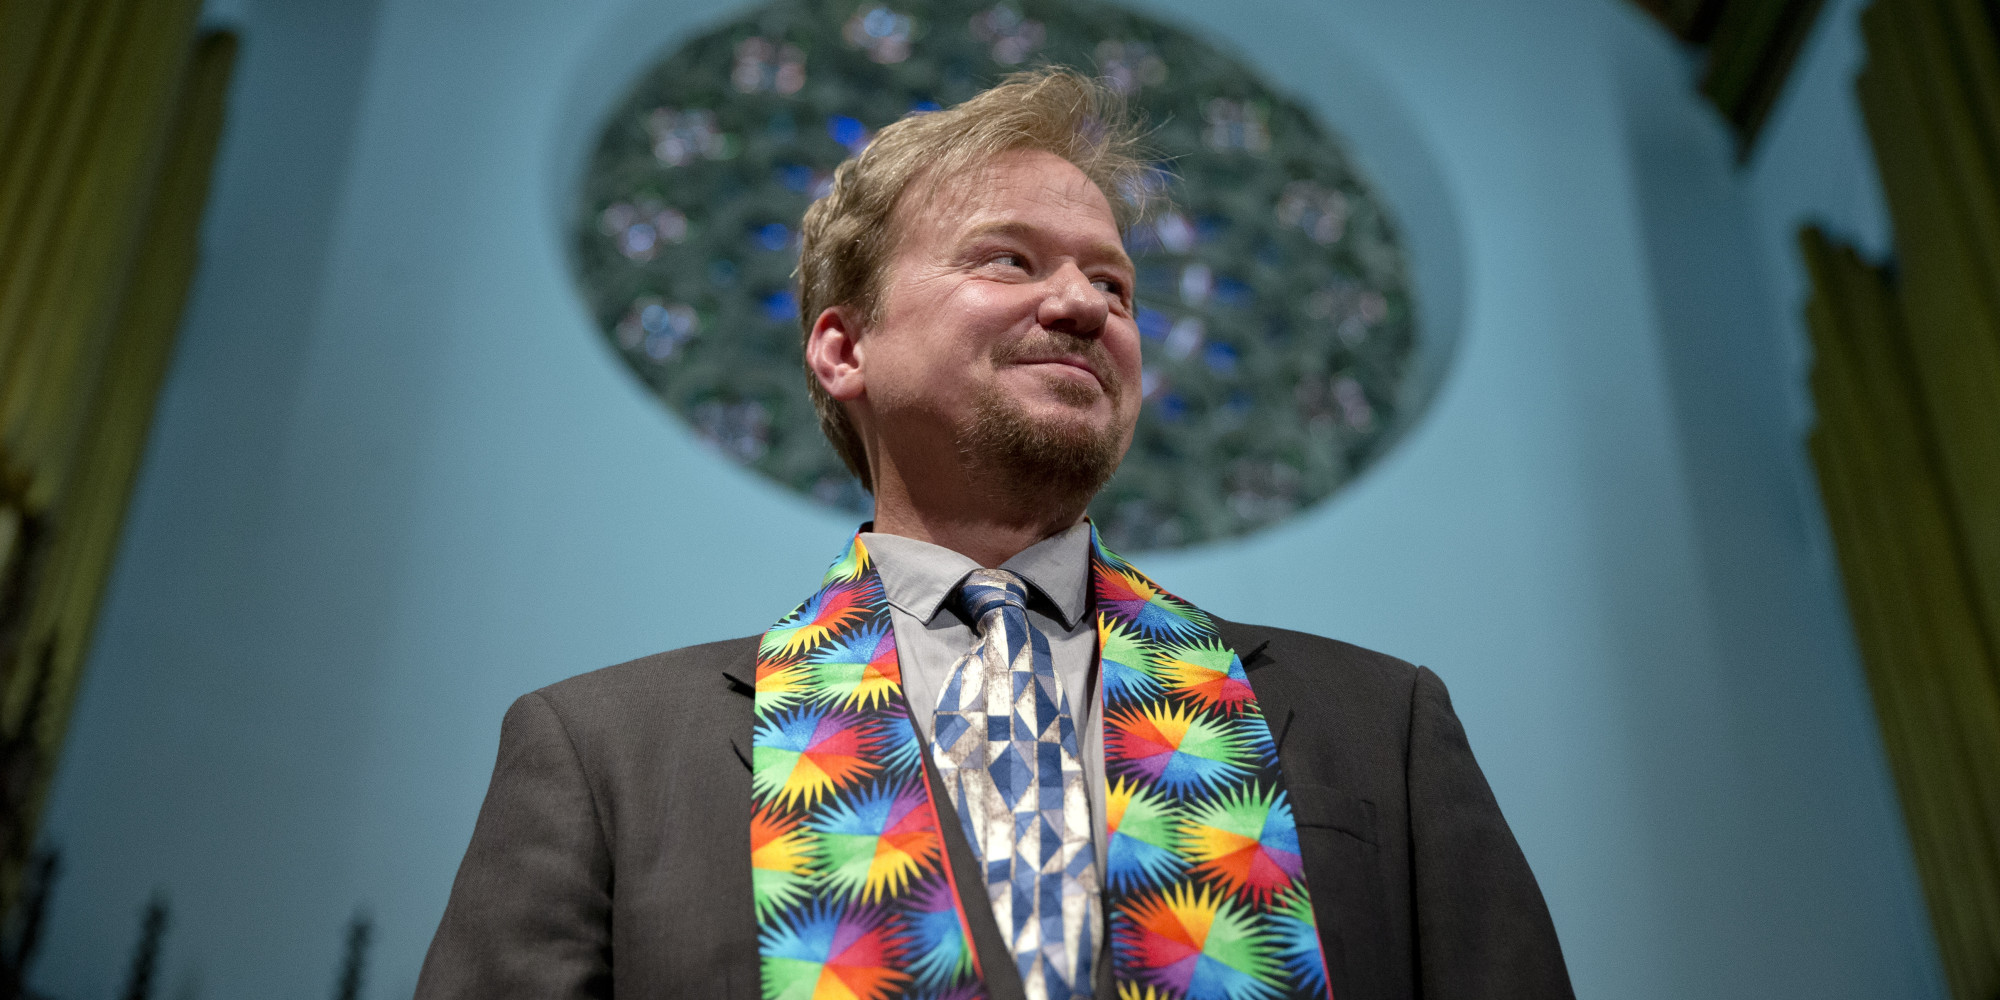 frank-shaefer-praises-church-refrocking-after-performing-son-s-gay-marriage-huffpost